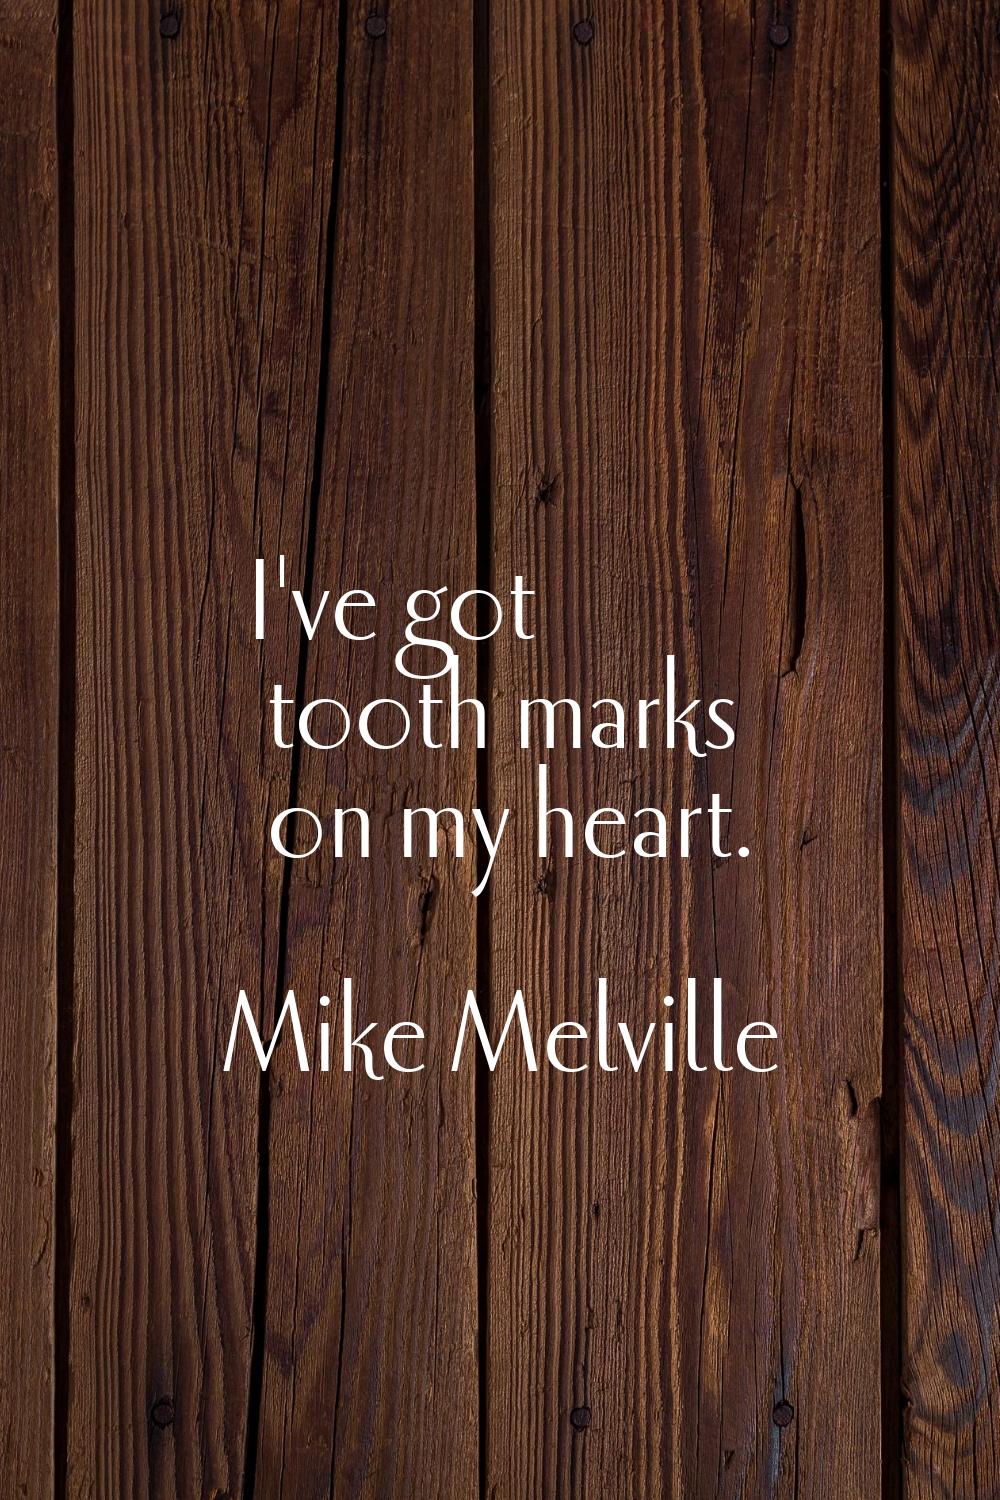 I've got tooth marks on my heart.